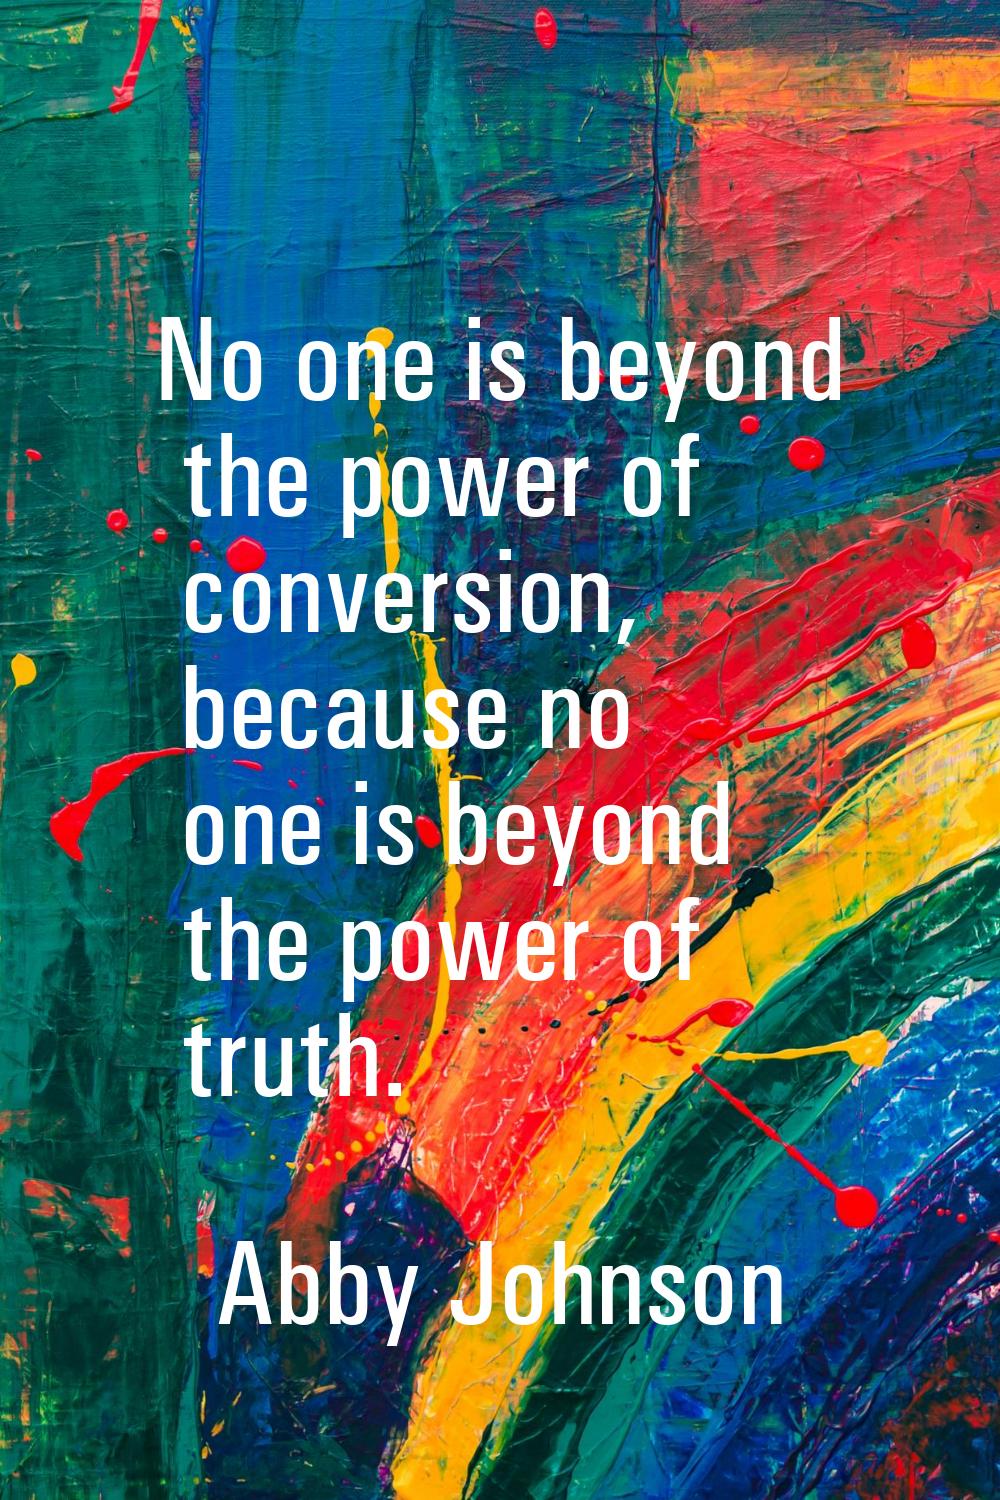 No one is beyond the power of conversion, because no one is beyond the power of truth.